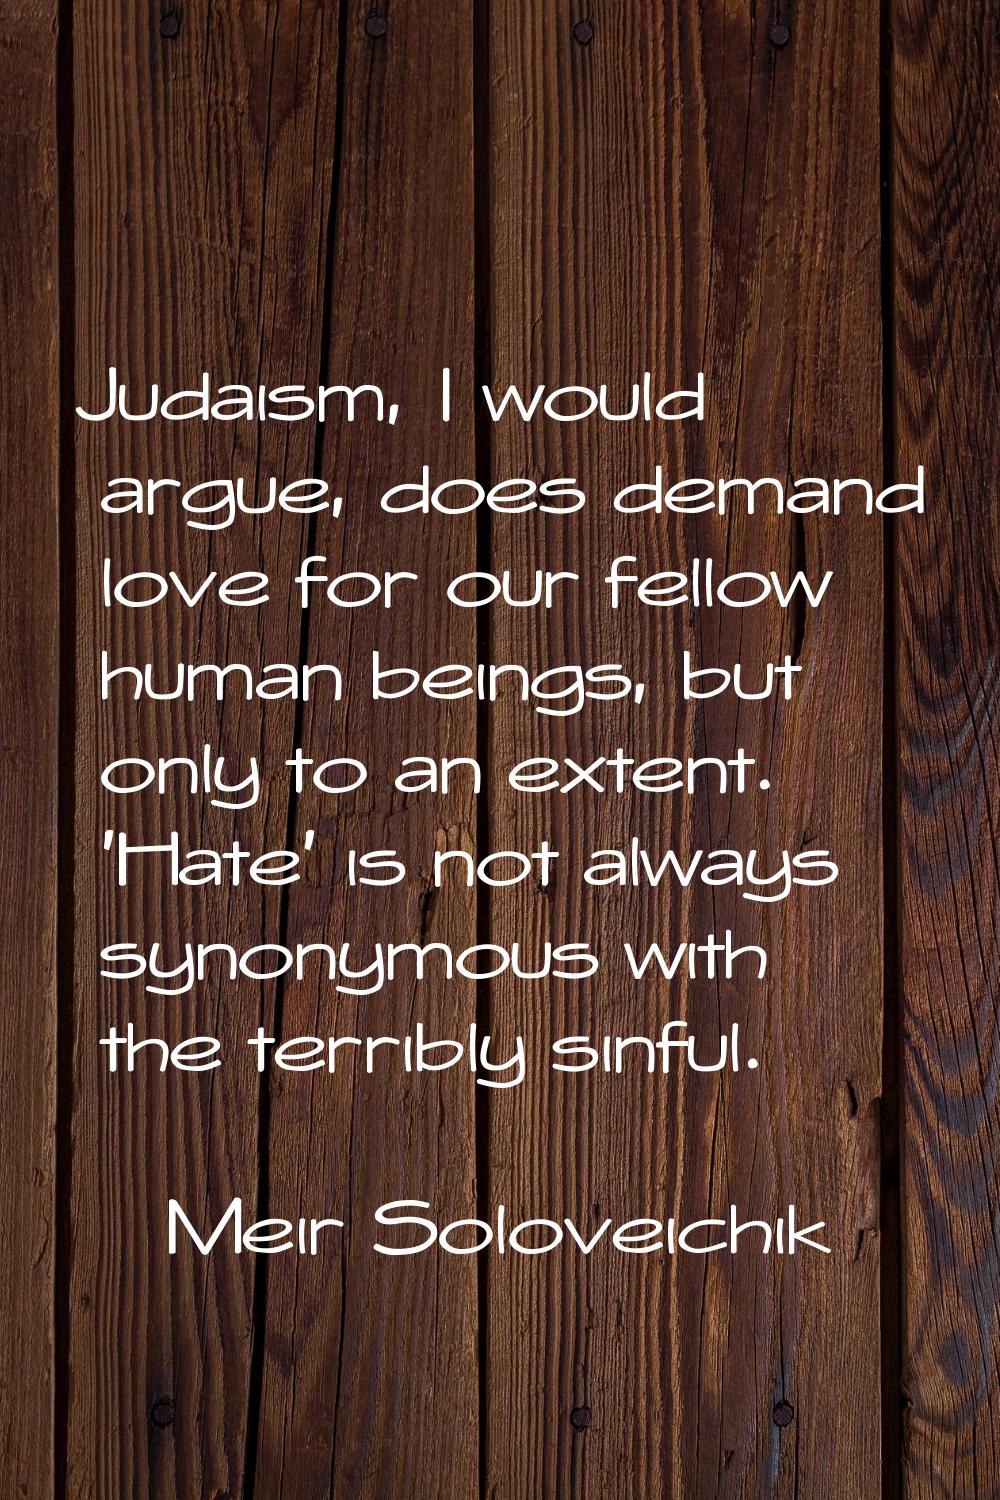 Judaism, I would argue, does demand love for our fellow human beings, but only to an extent. 'Hate'